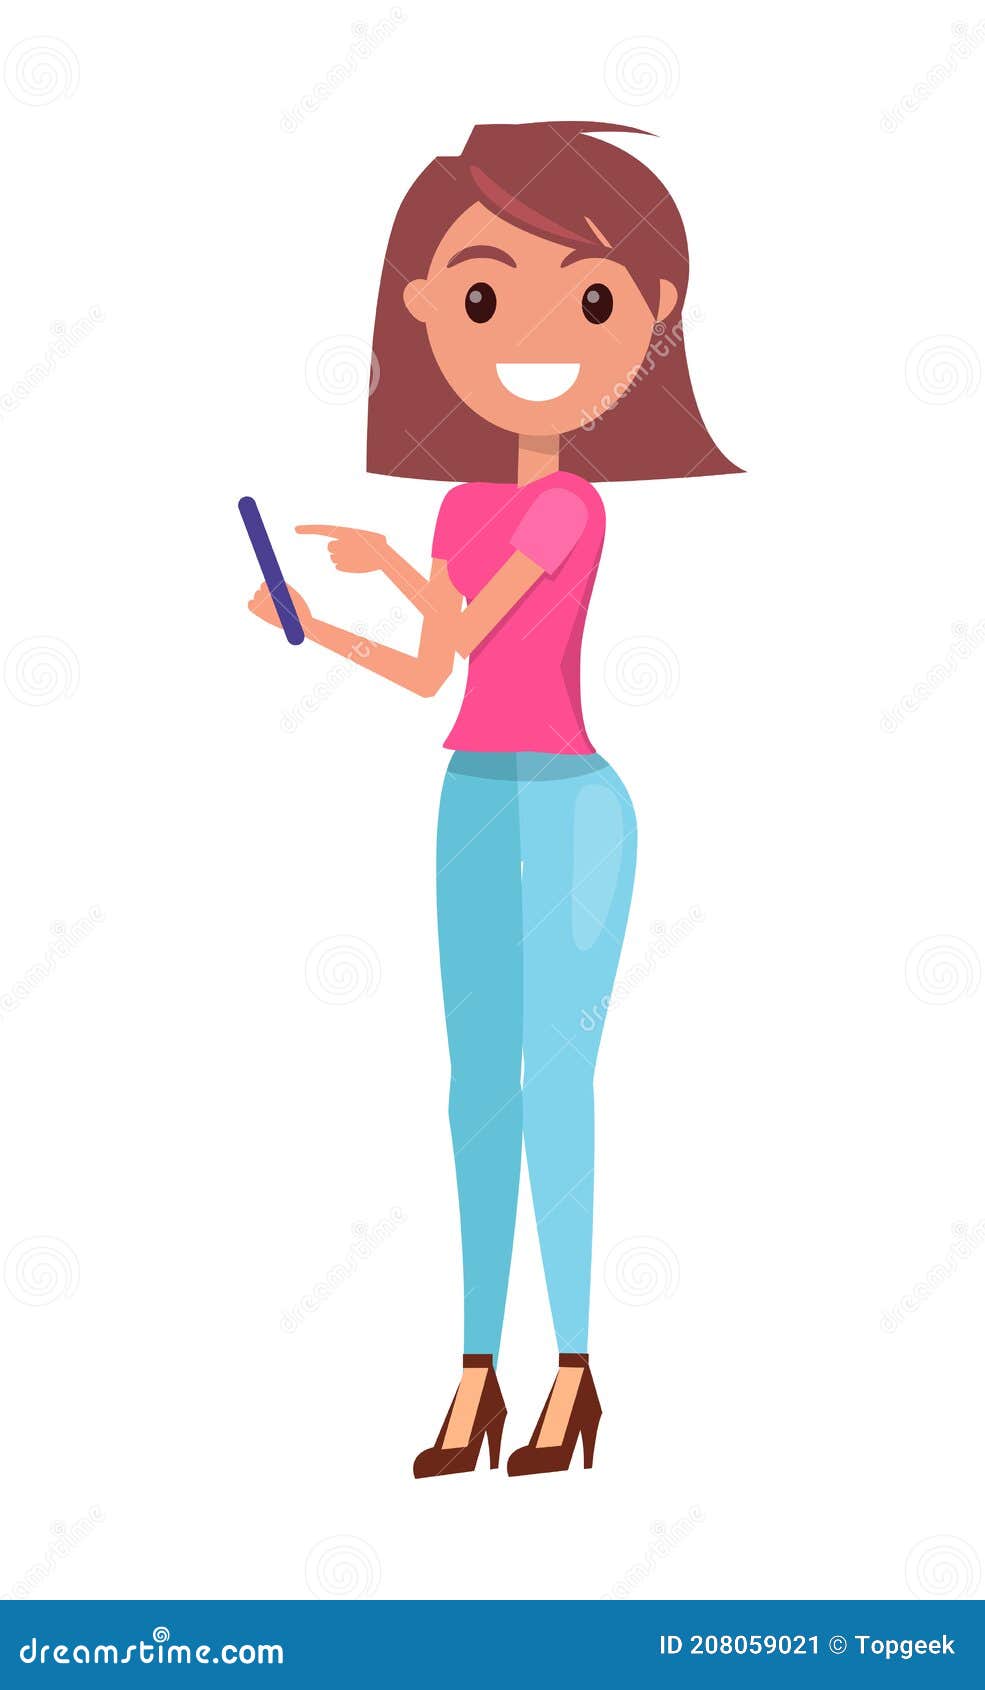 Young Girl Stands in 3 4 Pose and Holds Smartphone. Modern Style